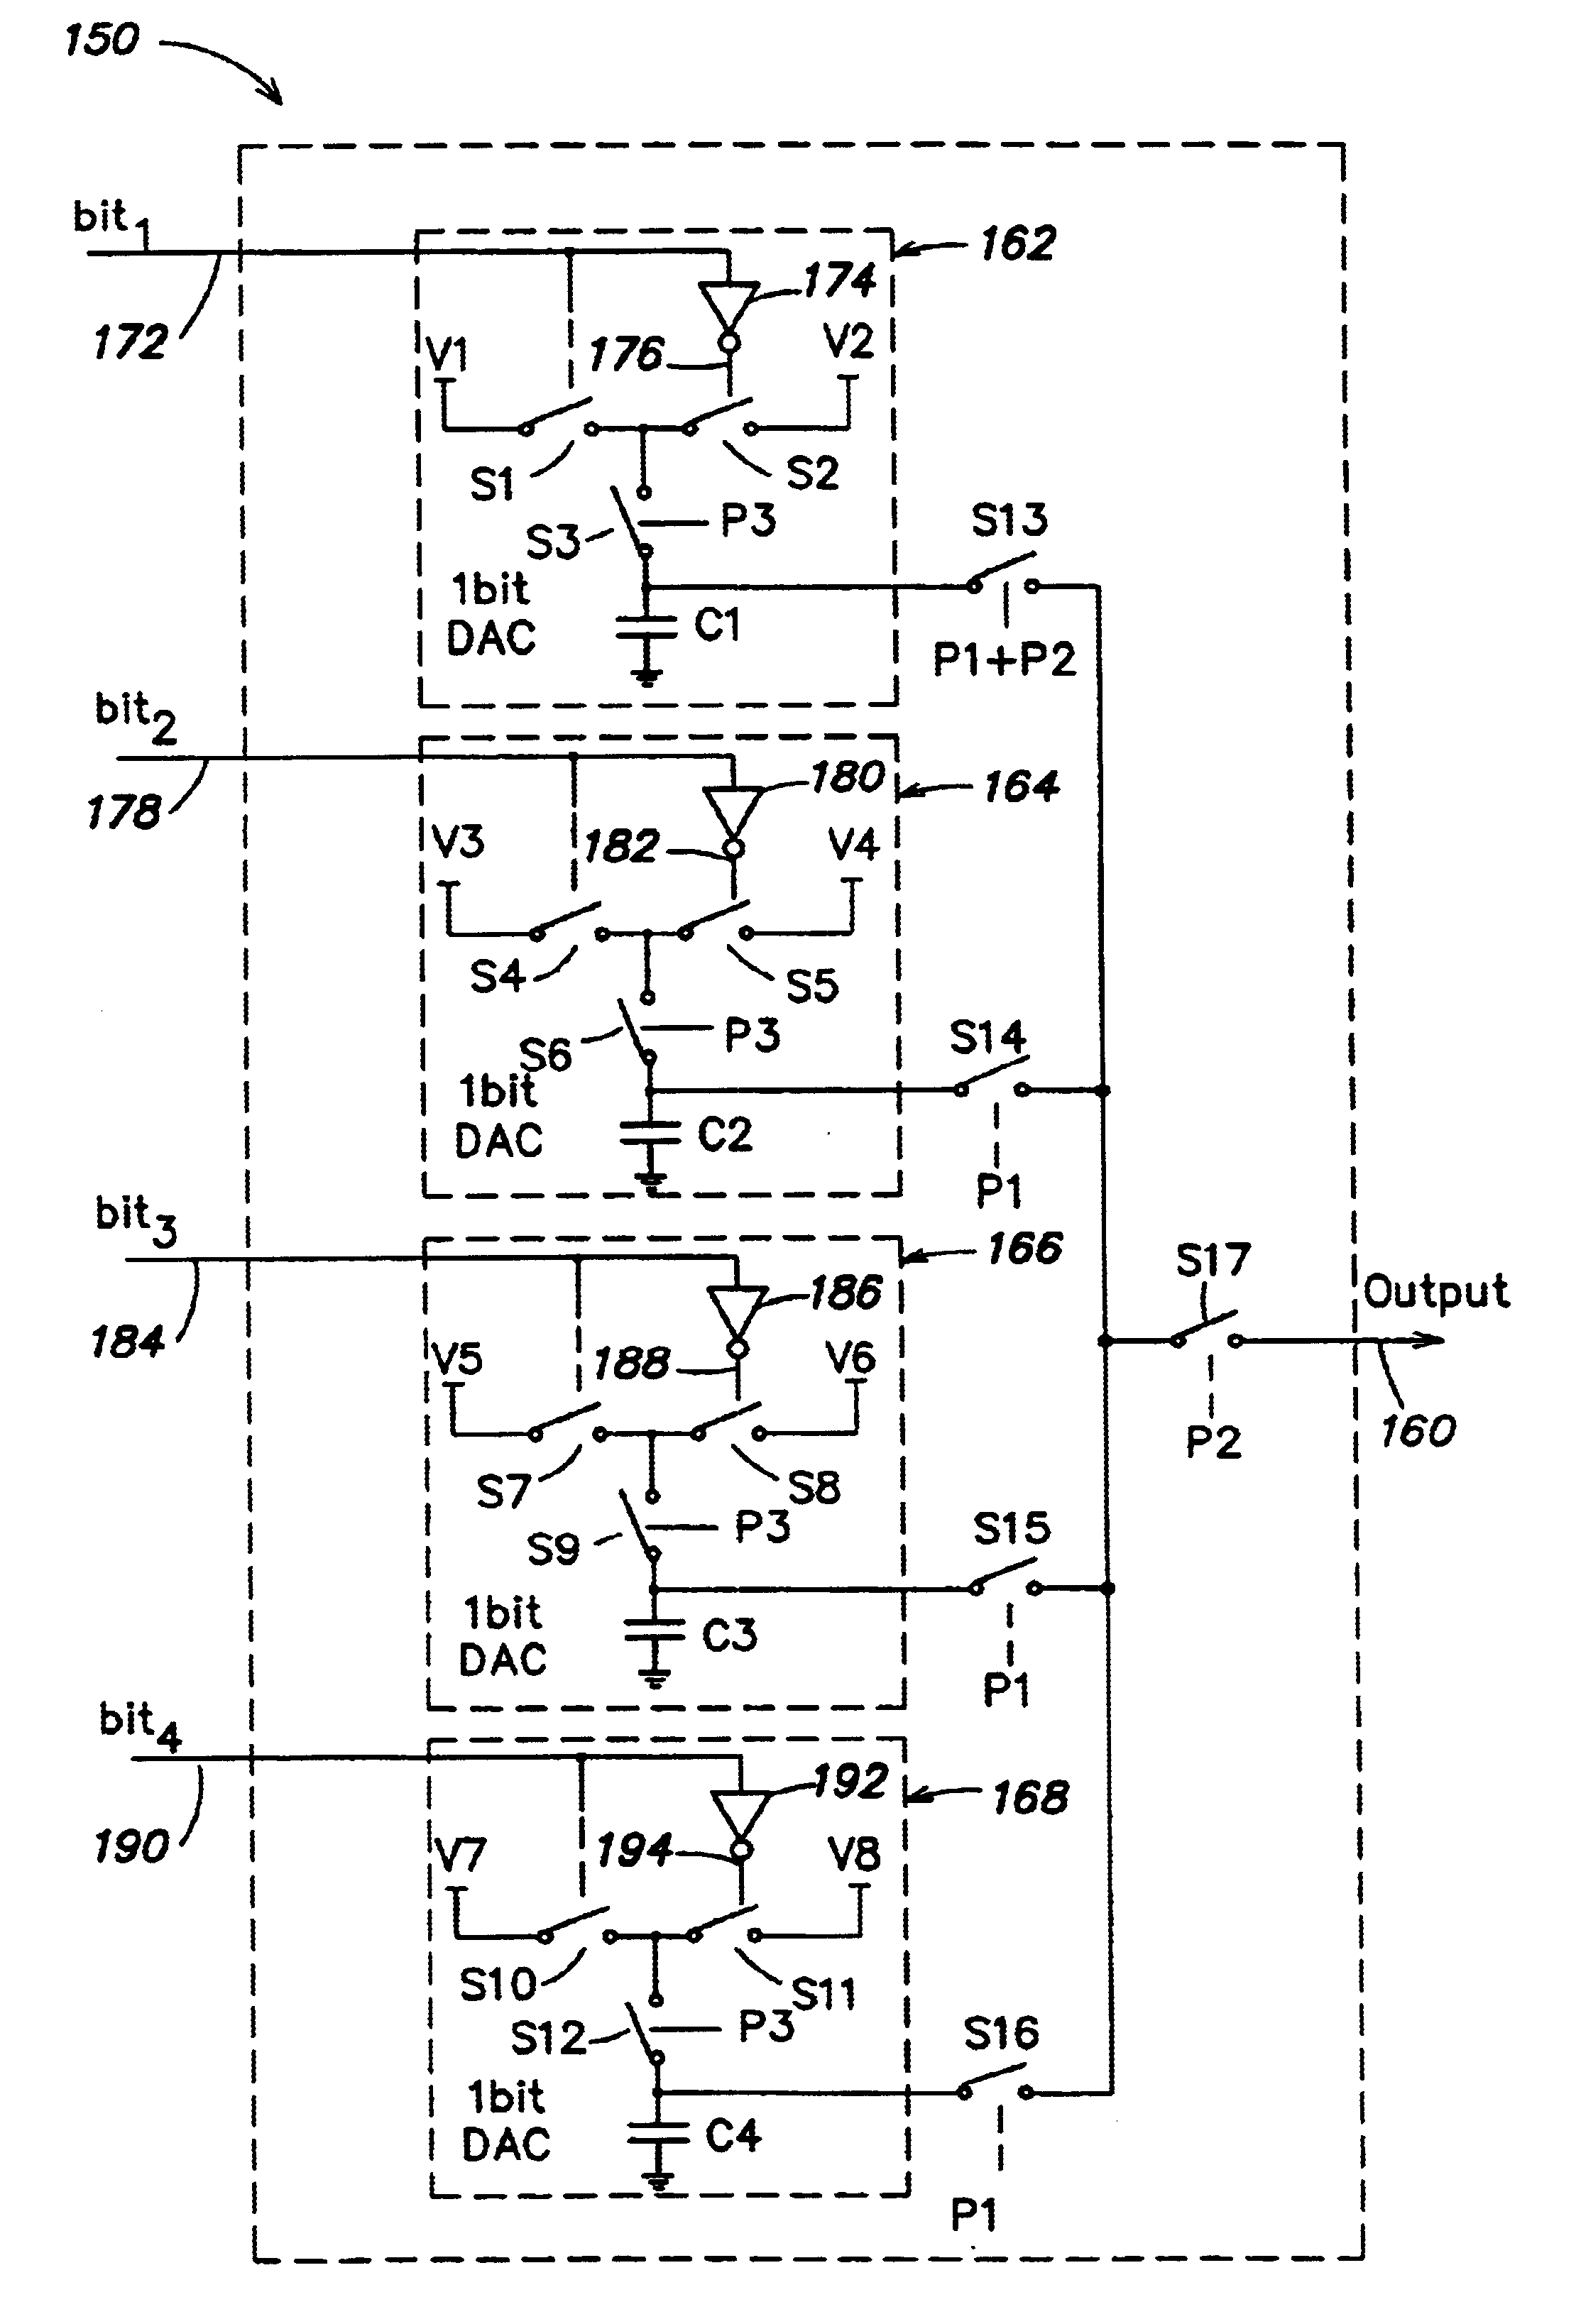 Method and apparatus for use in switched capacitor systems